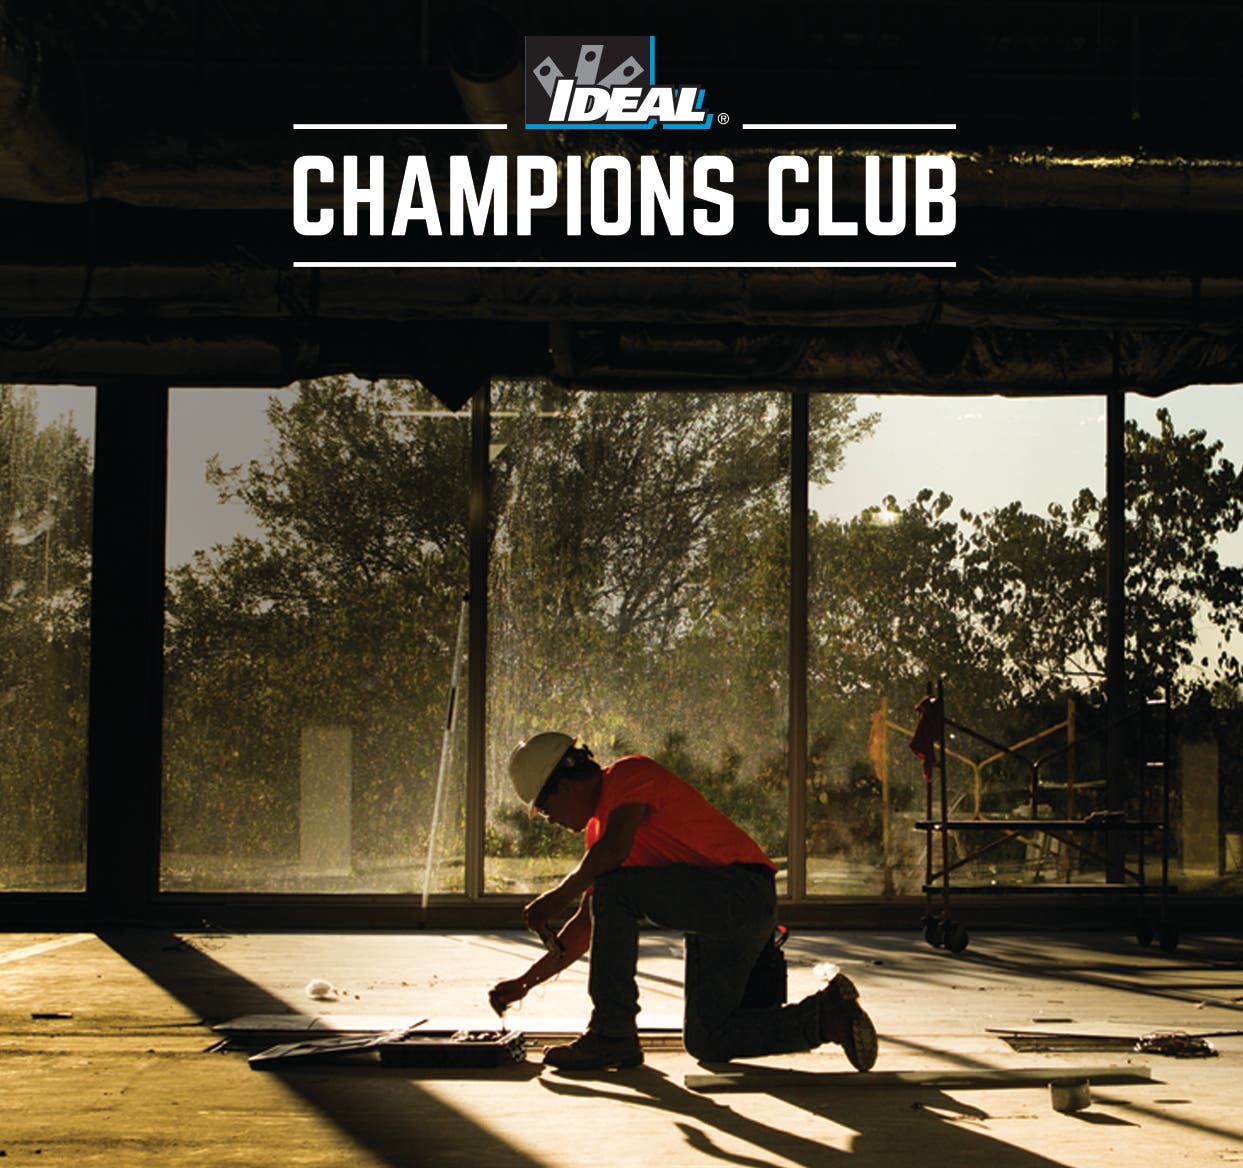 IDEAL Champions Club Man Kneeling while working on ground